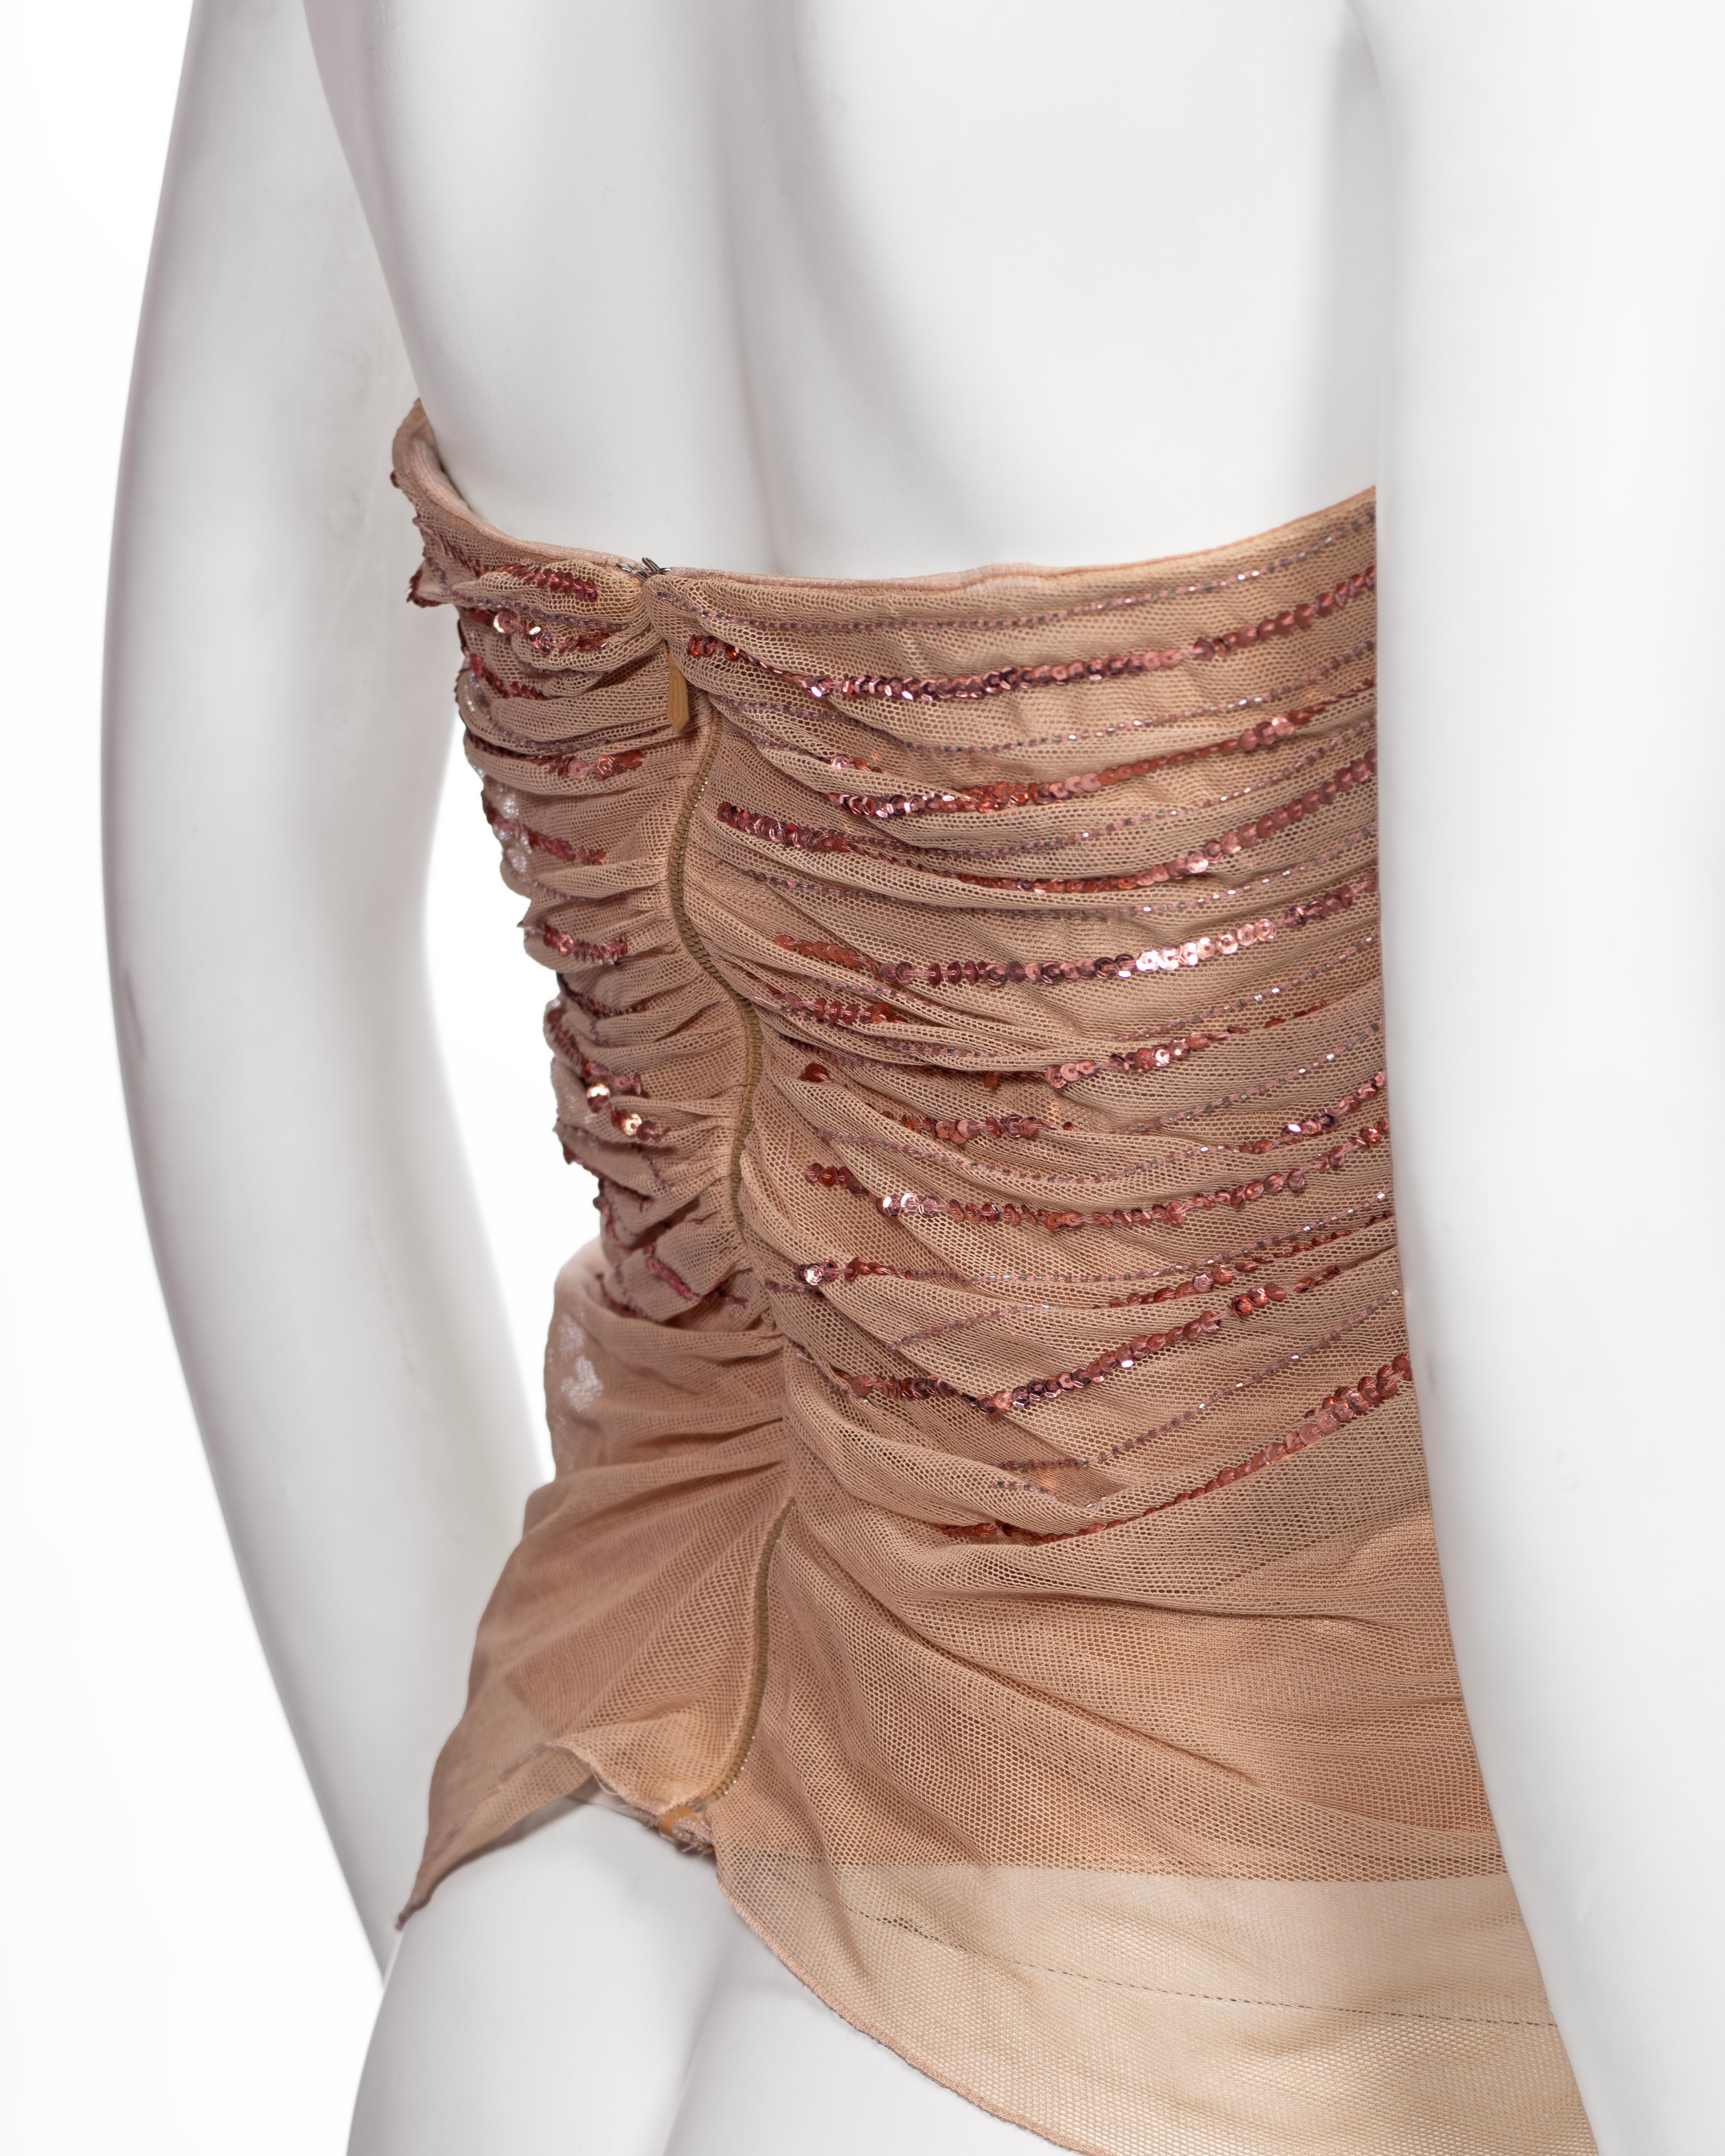 Christian Dior by John Galliano Nude Smocked Mesh and Sequin Corset Top, FW 2005 For Sale 8